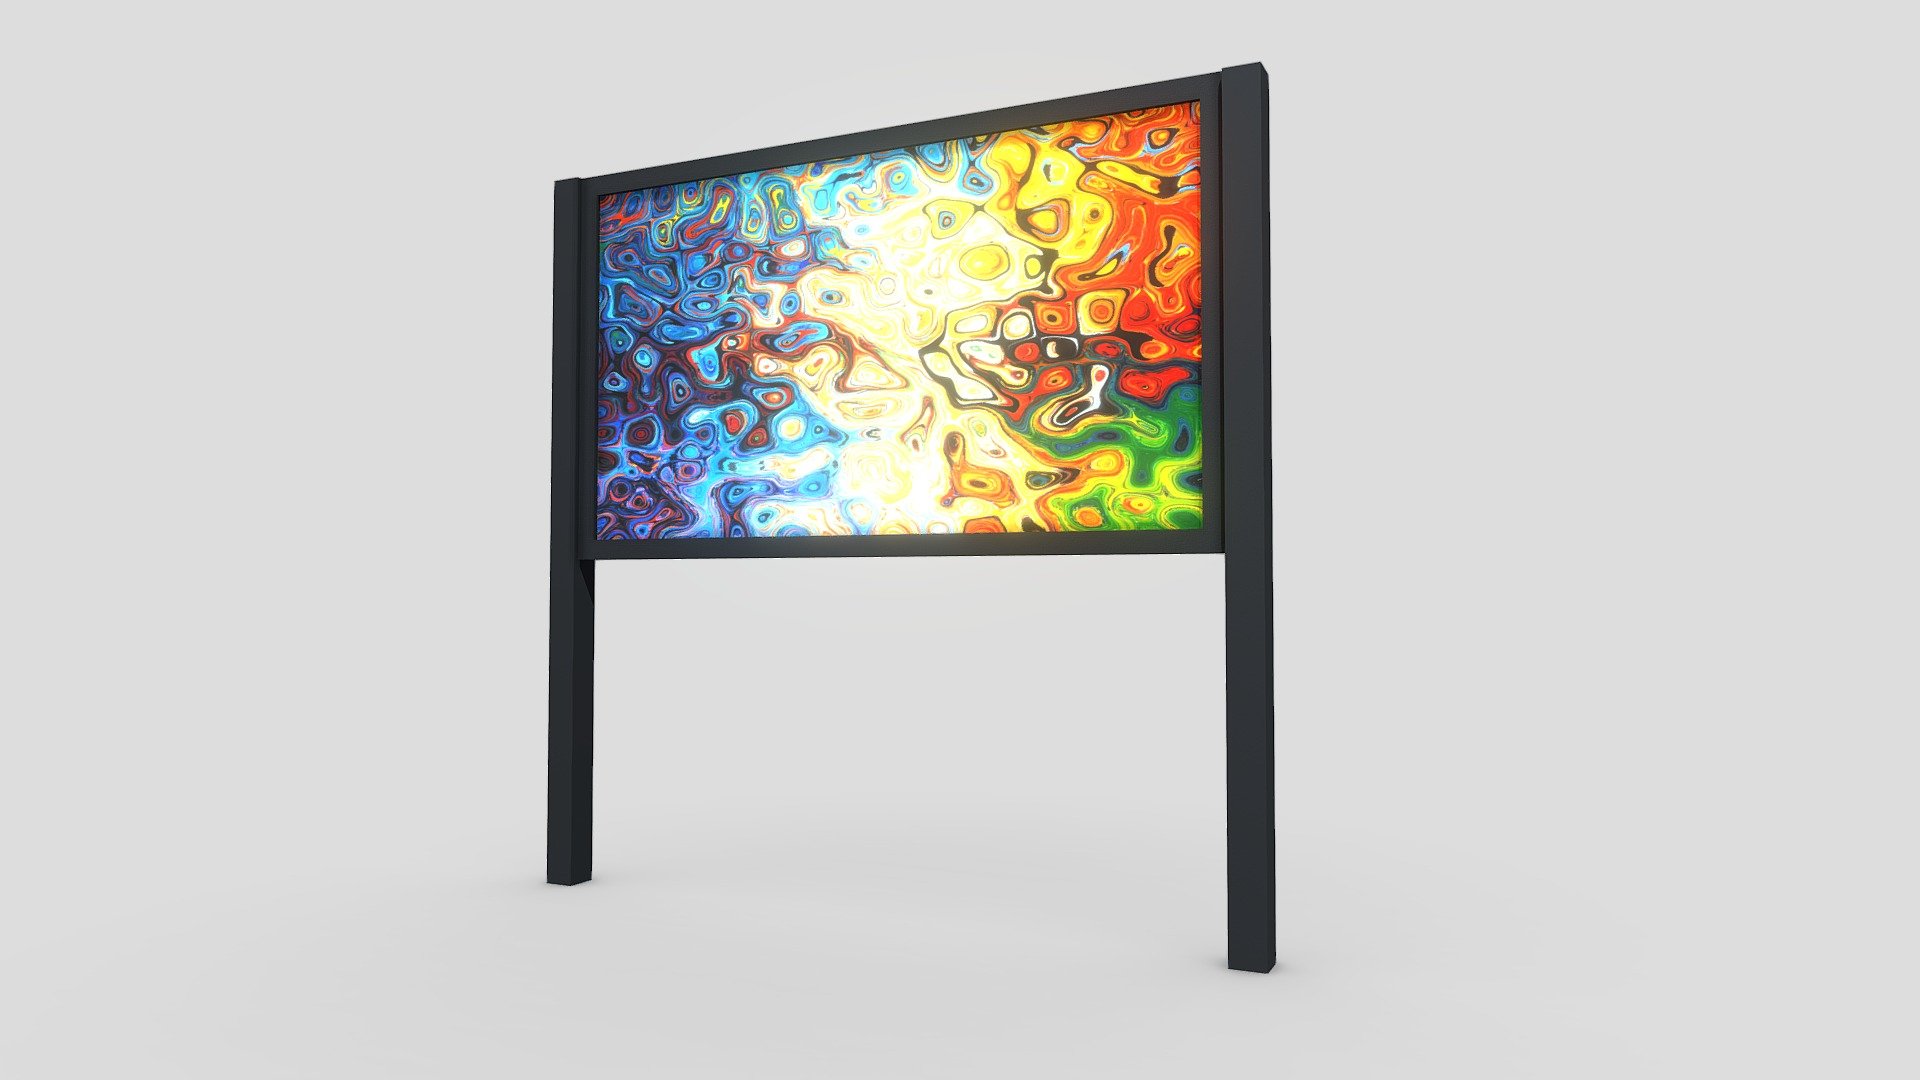 LED-display
side ratio 16:9
2 stands of galvanised steel
aluminium body - LED Display Video 16:9 - 3D model by WaypointSignage (@waypoint) 3d model